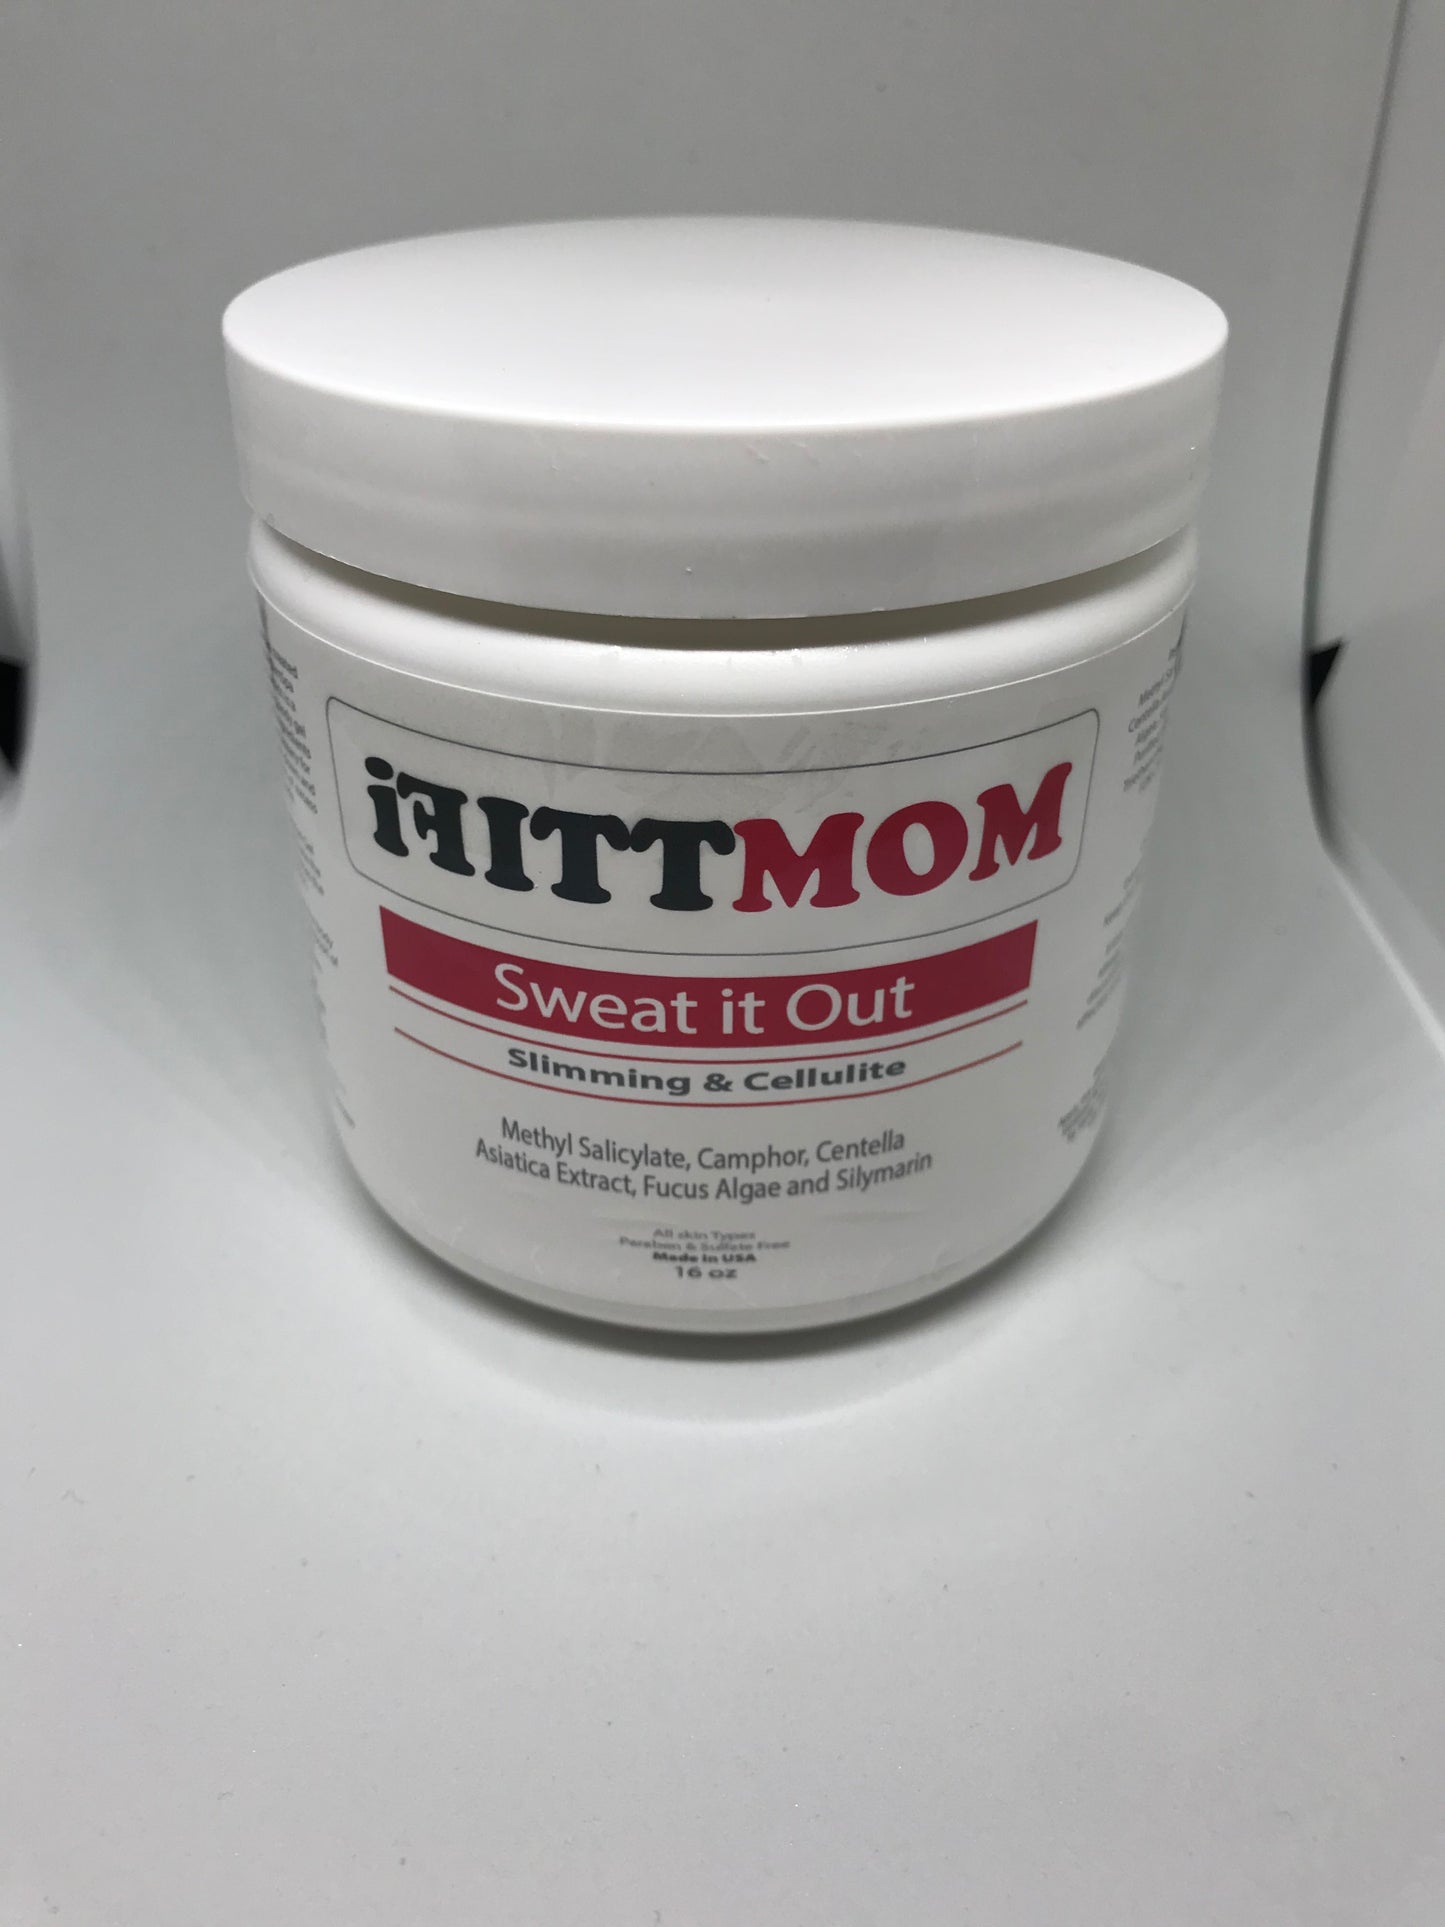 IFITTMOM Sweat it Out Gel